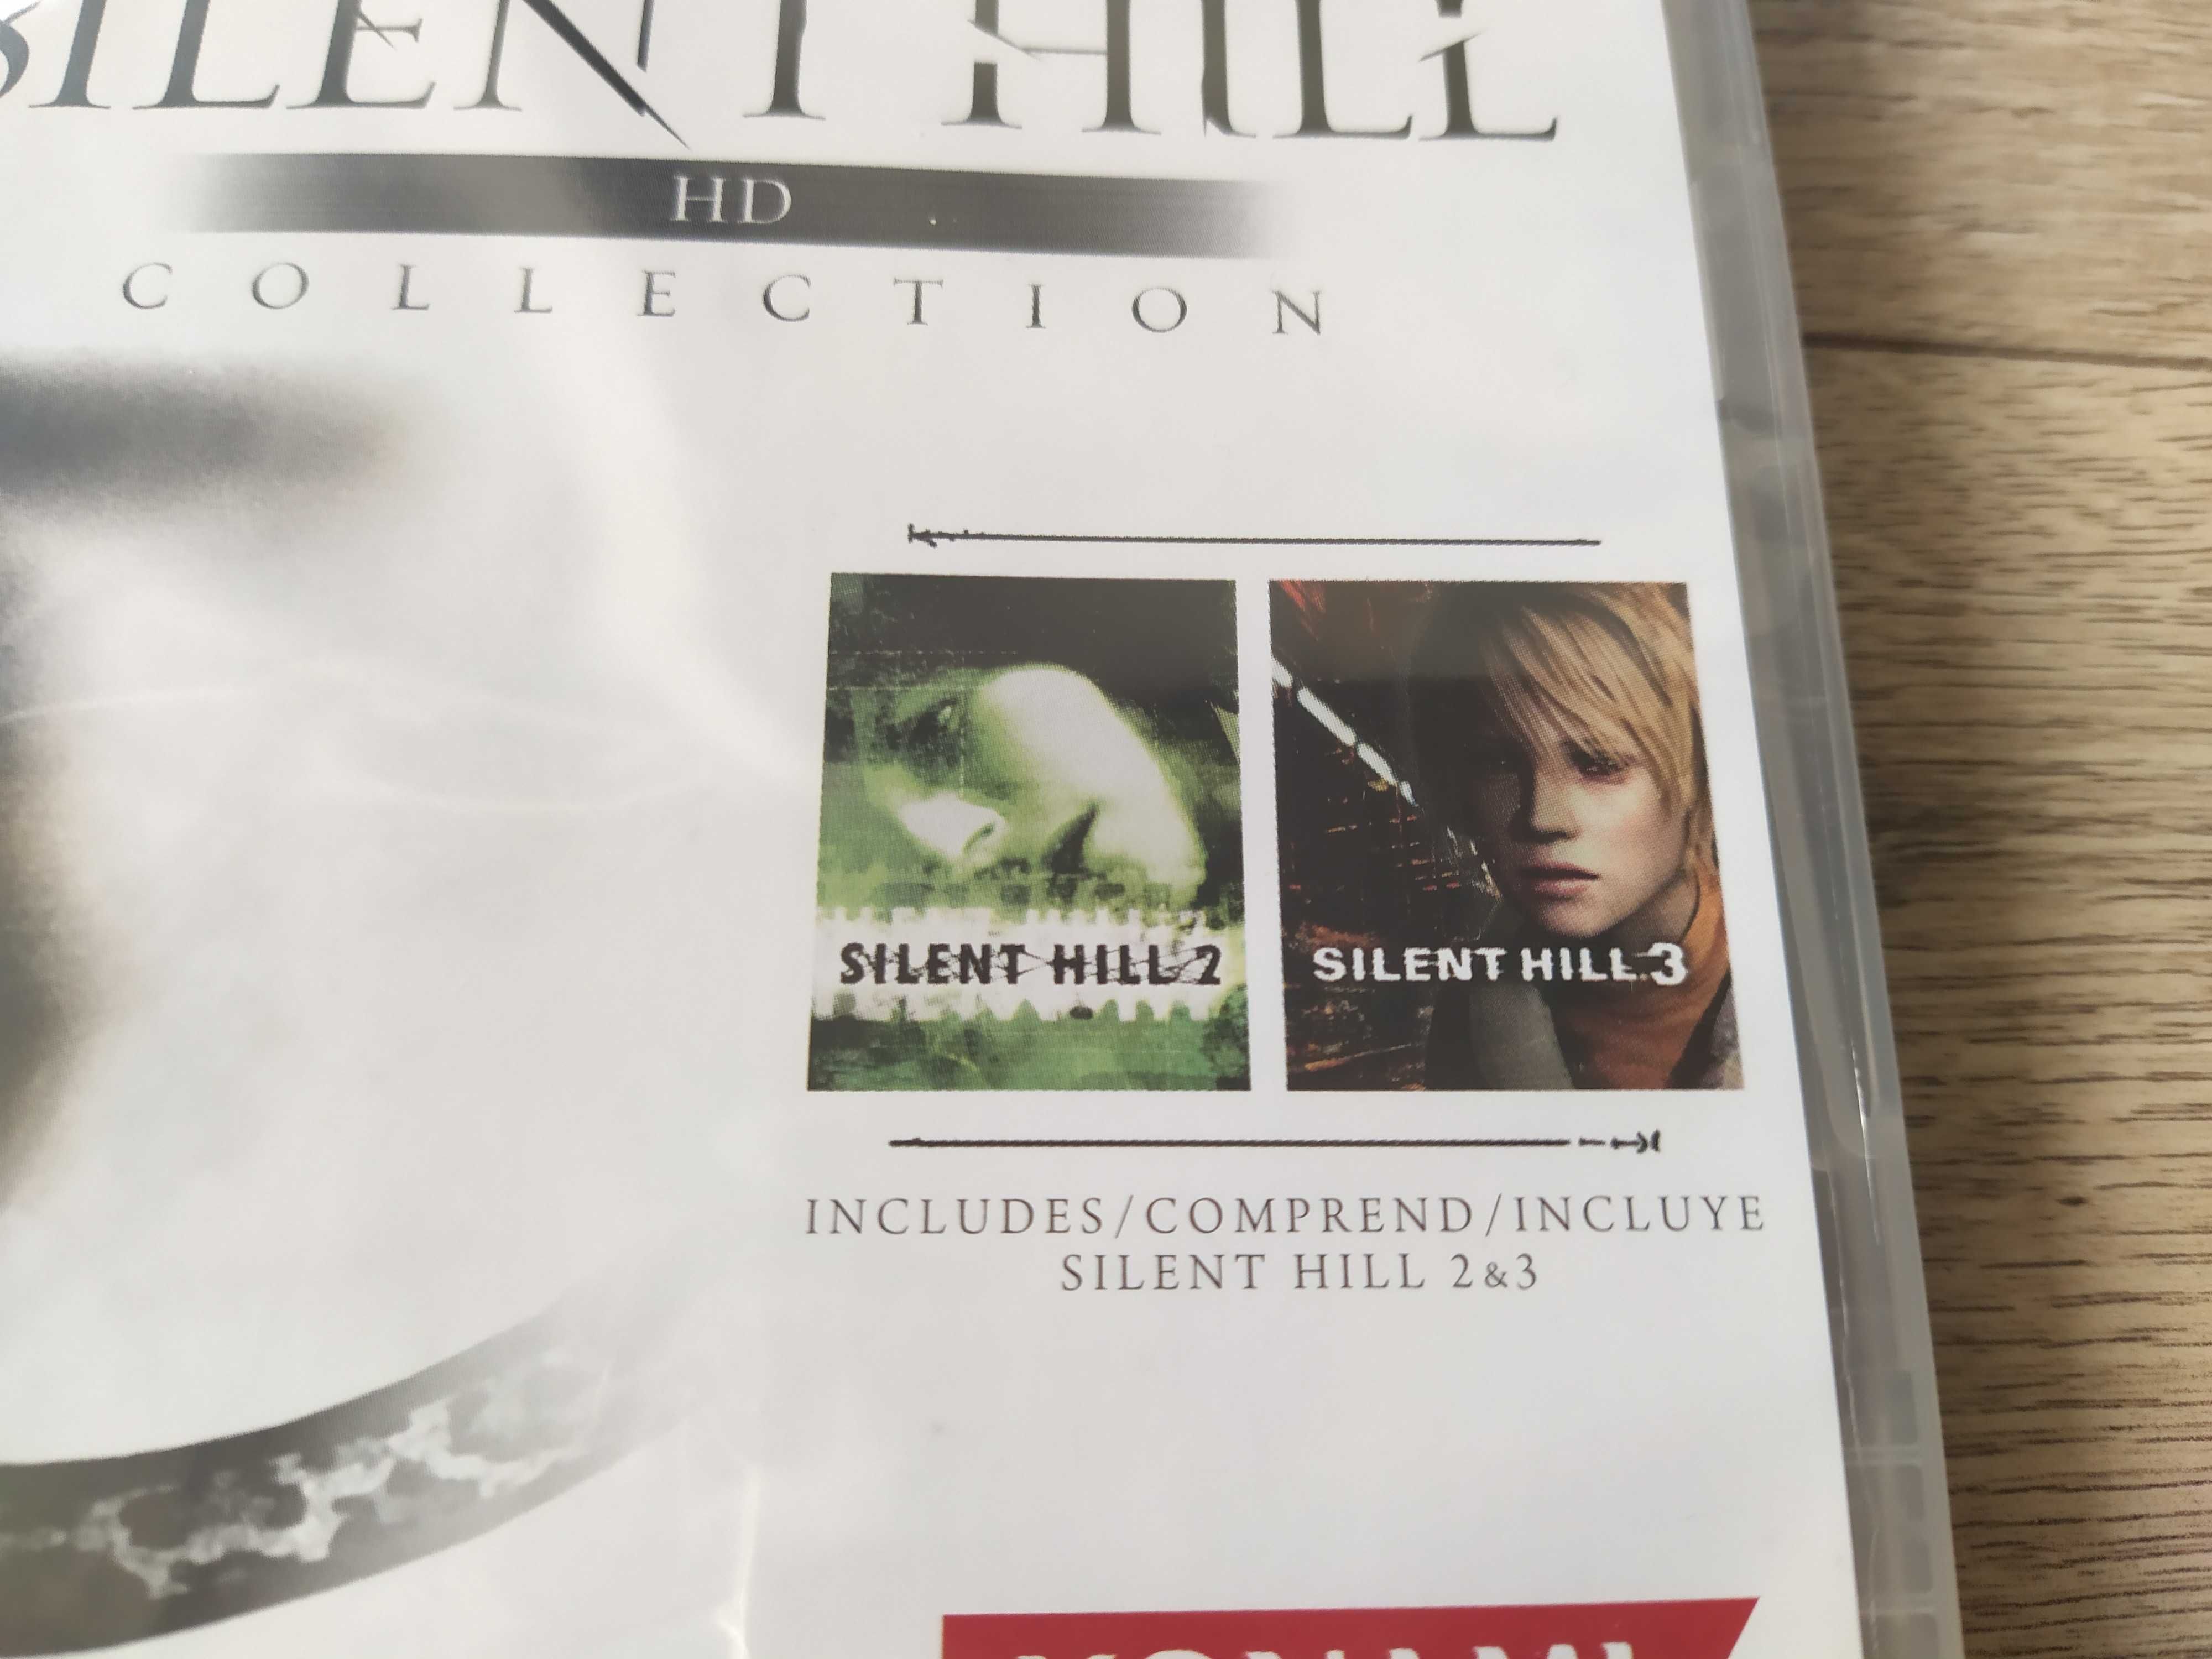 Silent Hill HD Collection [PS3] - Zestaw 2 gier! - Nowa w folii!